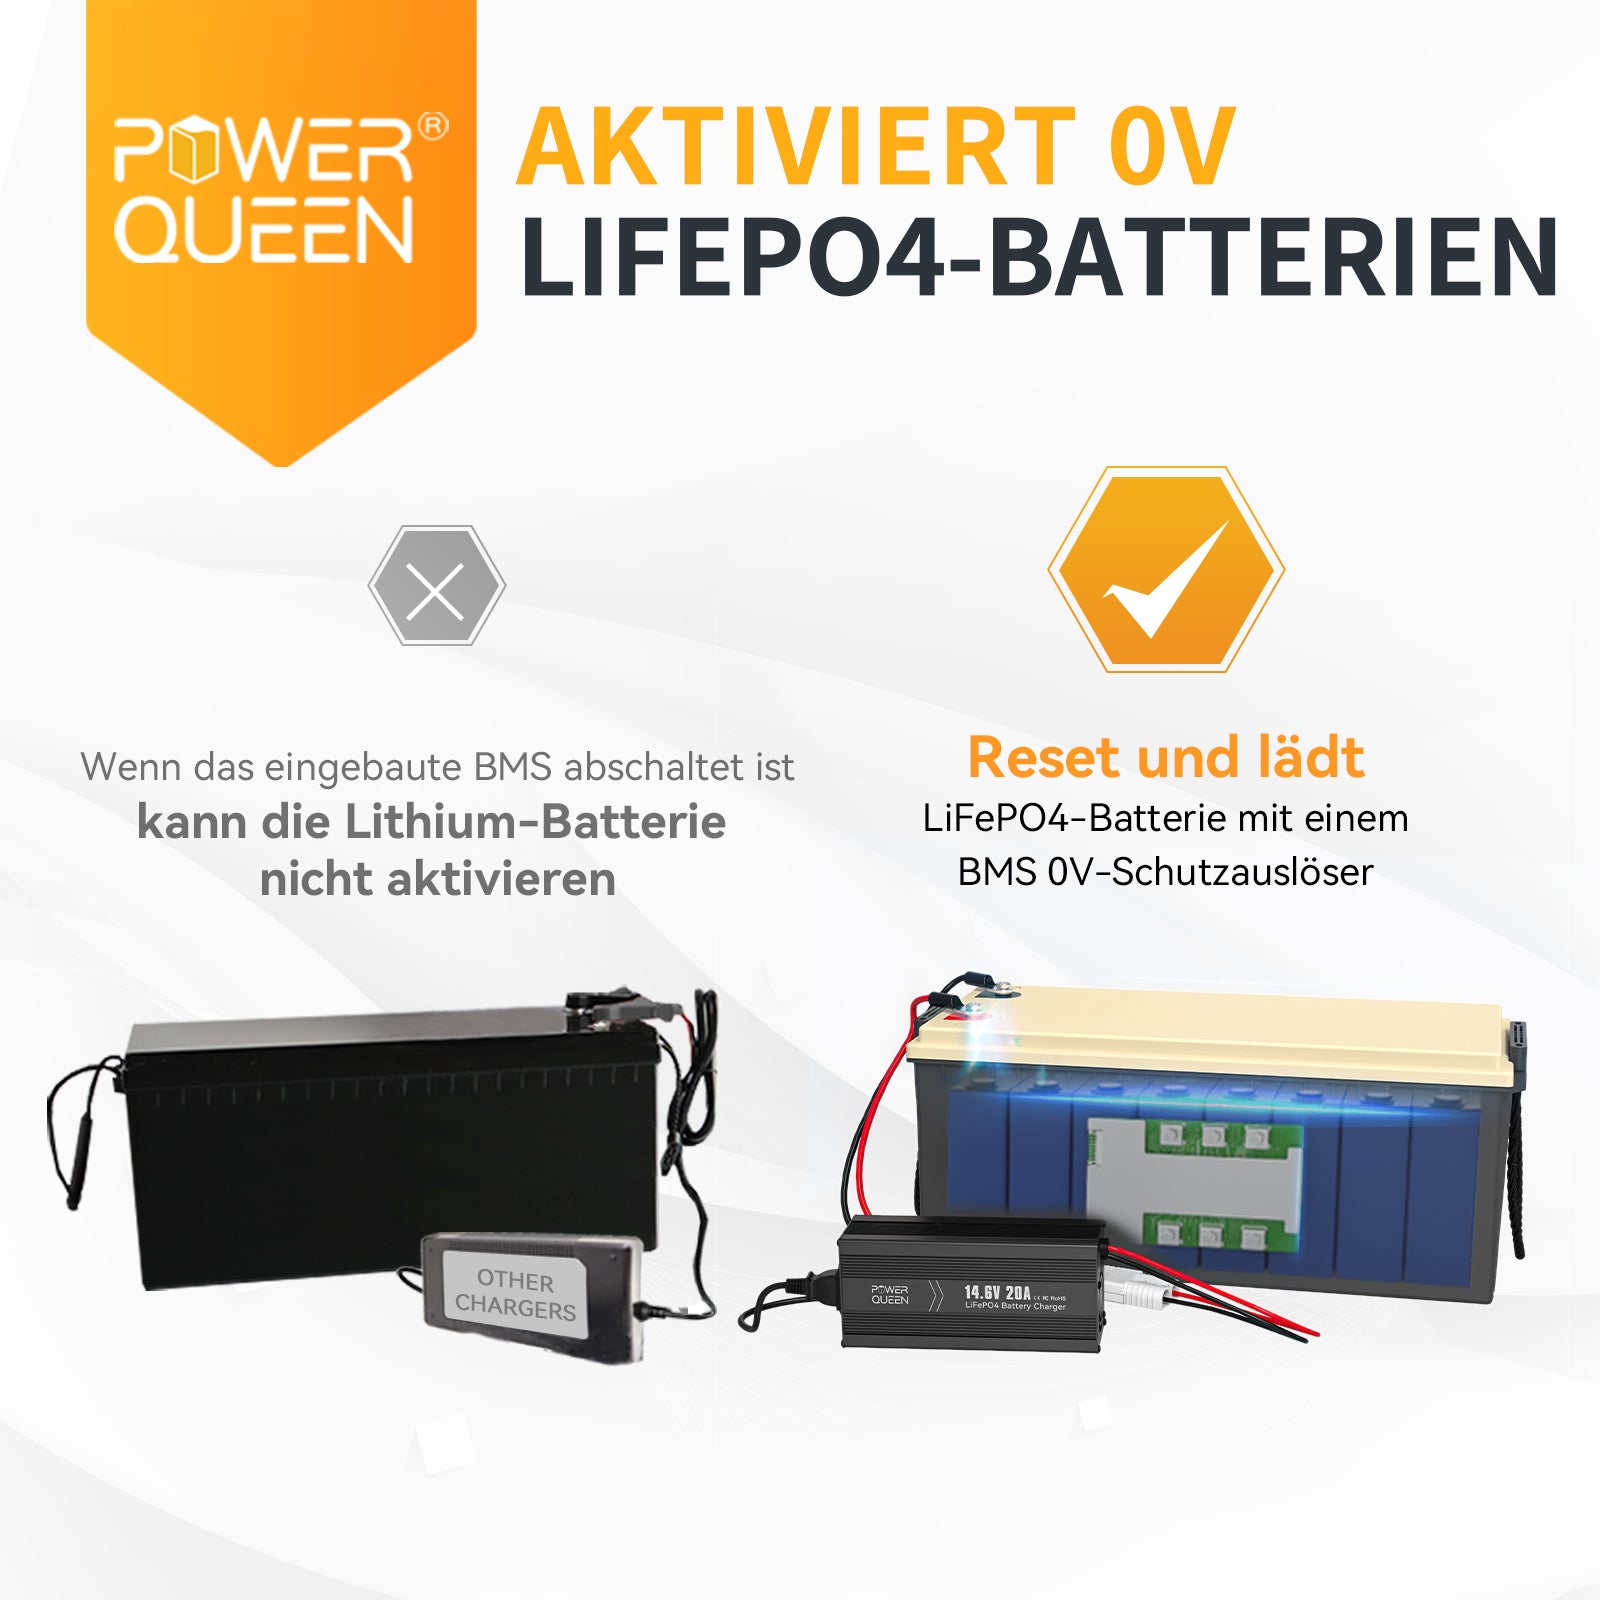 Chargeur Power Queen 14,6V 20A LiFePO4 pour batterie 12V LiFePO4